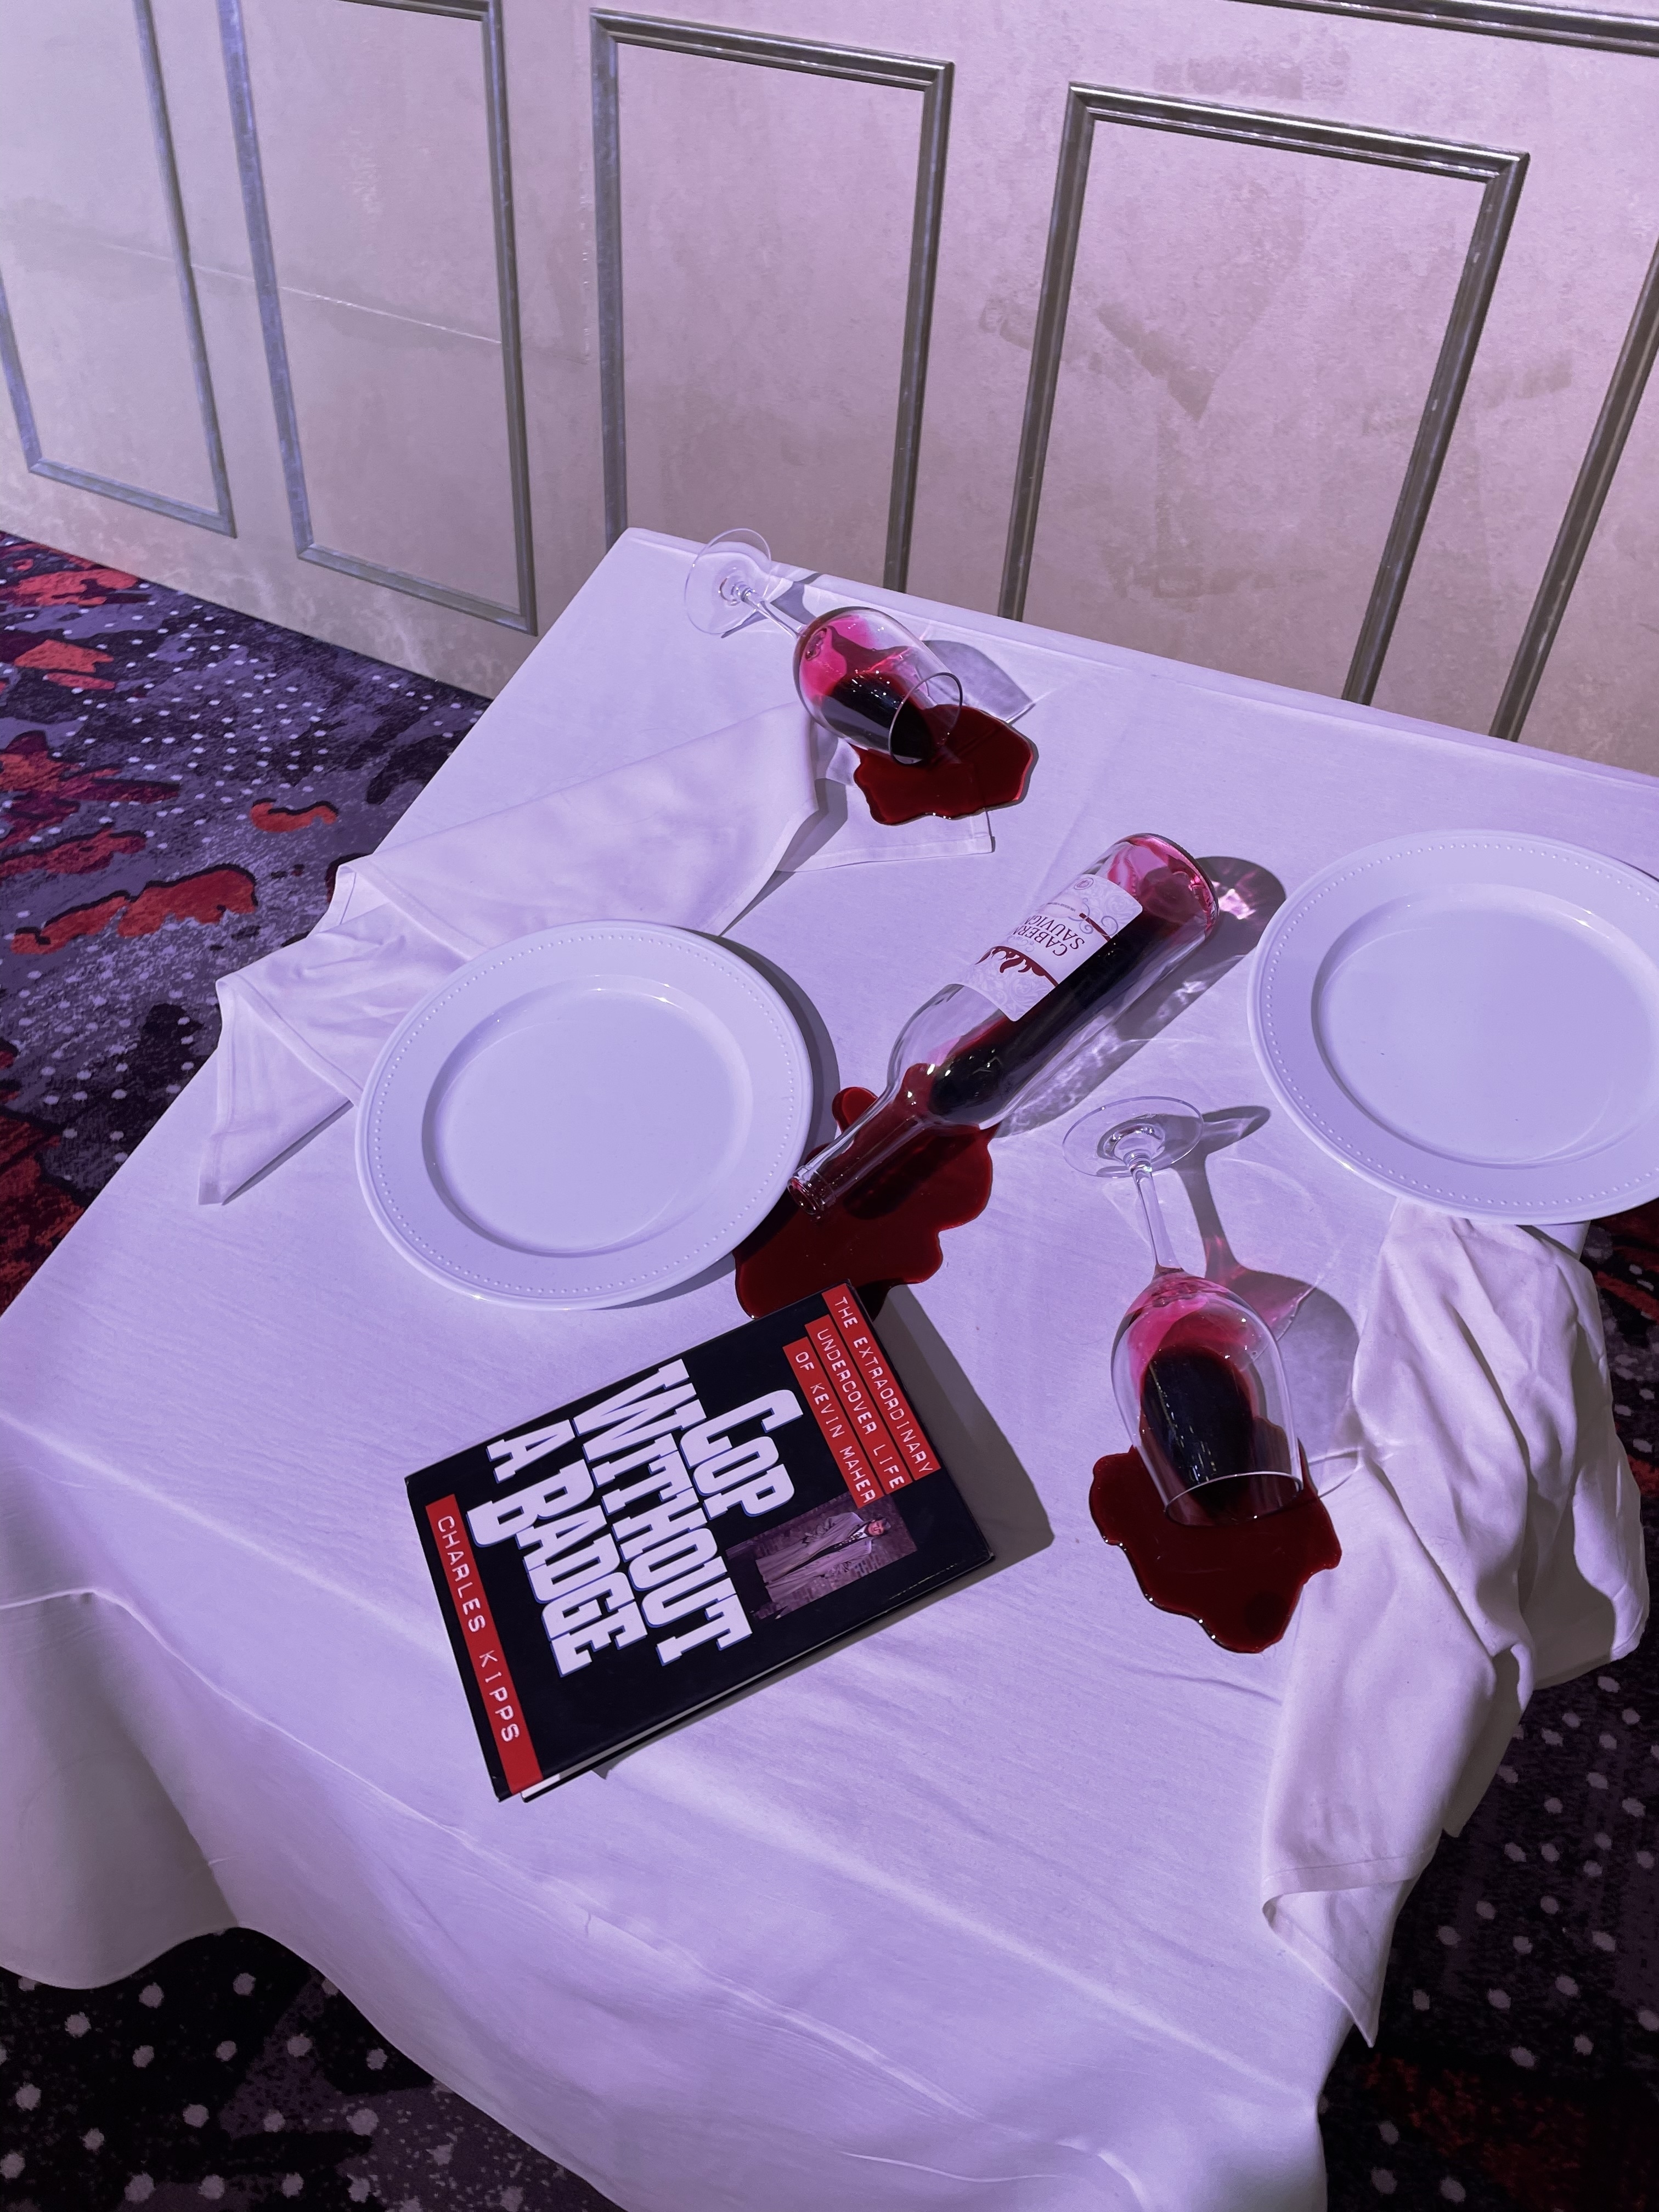 A white table cloth on a table displaying Danielle&#x27;s &quot;A cop without a badge&quot; book